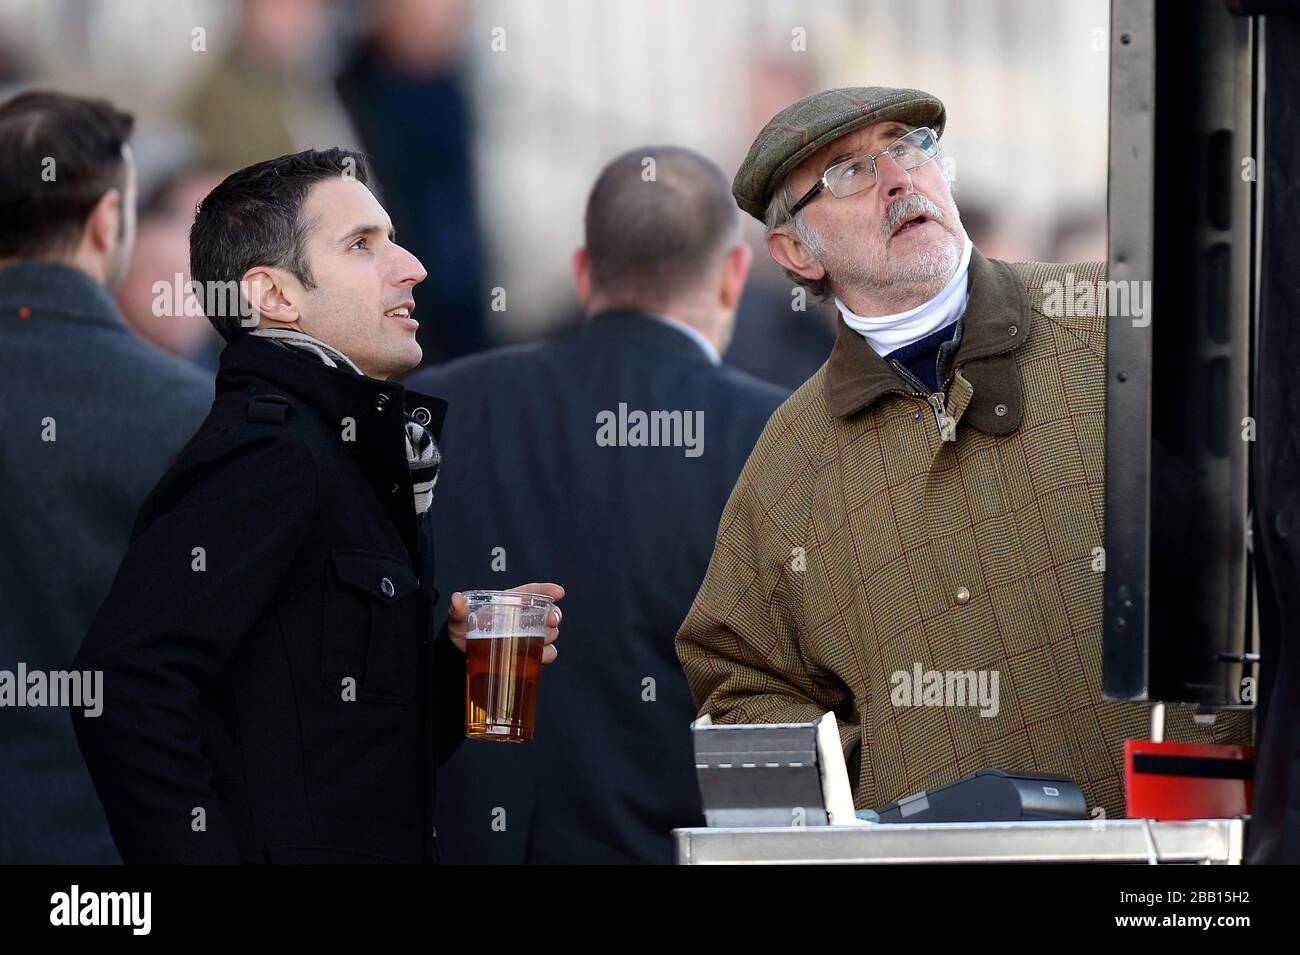 Racegoers place bets during the Tingle Creek Christmas Festival at Sandown Racecourse Stock Photo